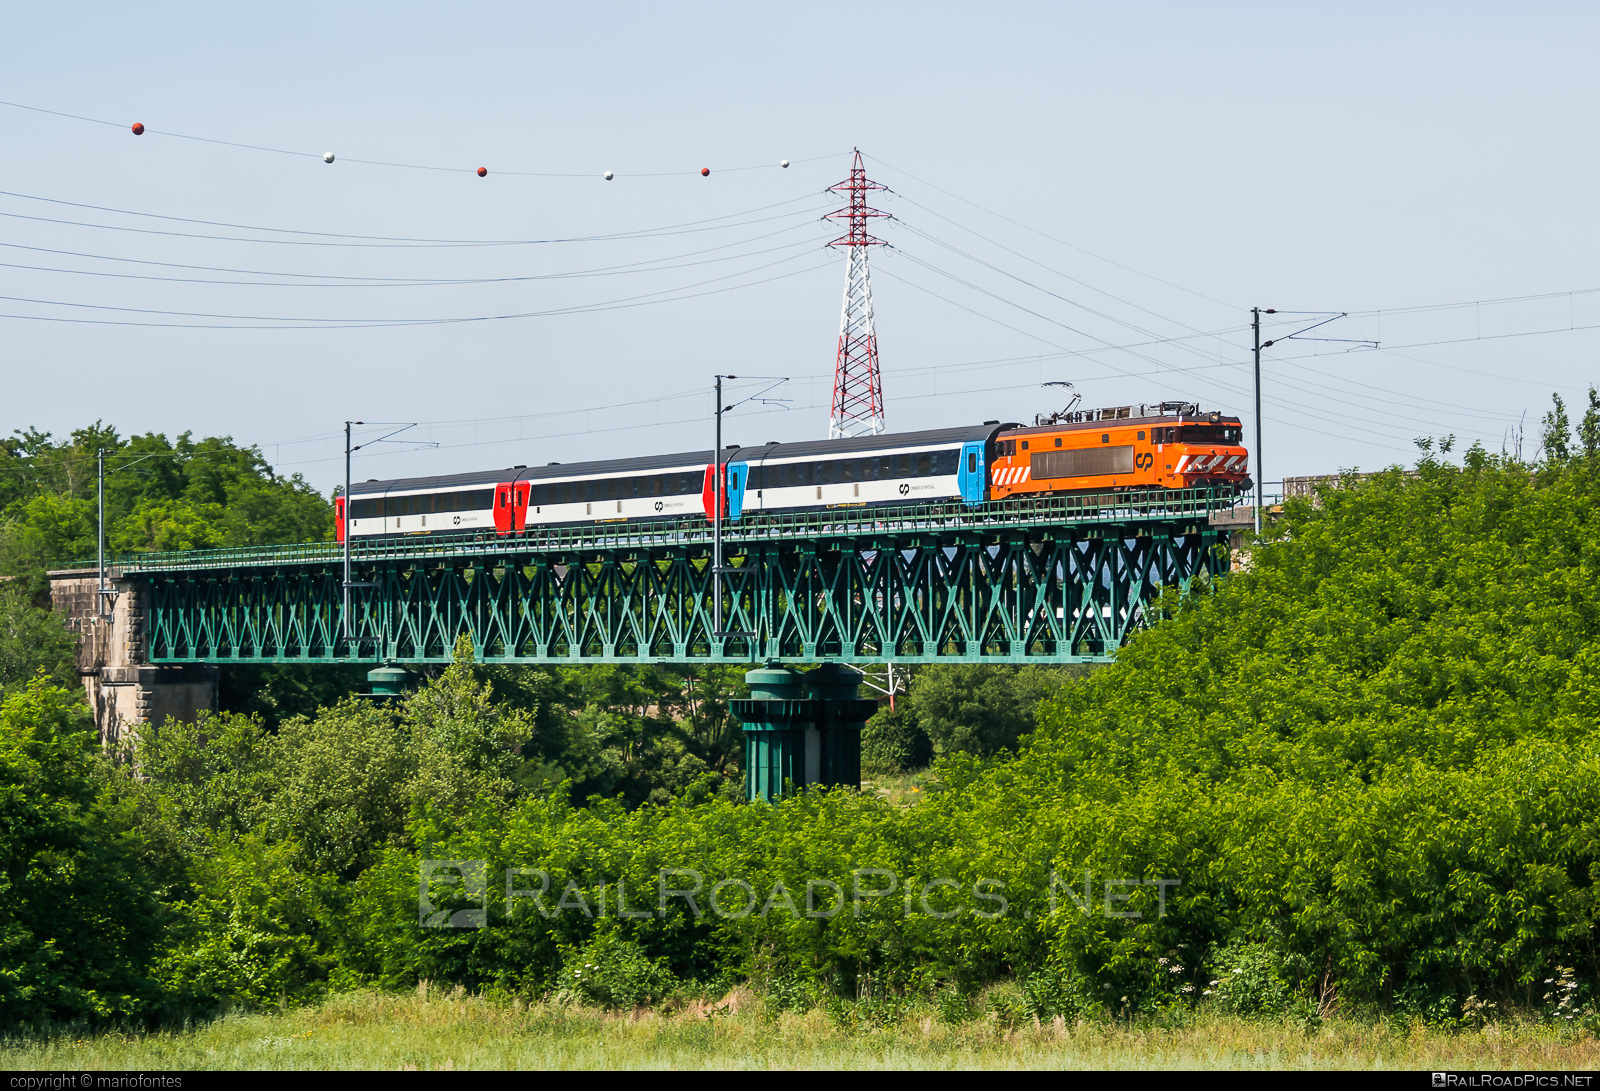 CP Class 2600 - 2607 operated by CP - Comboios de Portugal, E.P.E. #bridge #comboiosDePortugal #comboiosDePortugalEPE #cpClass2600 #nezCassee #sncfBB15000